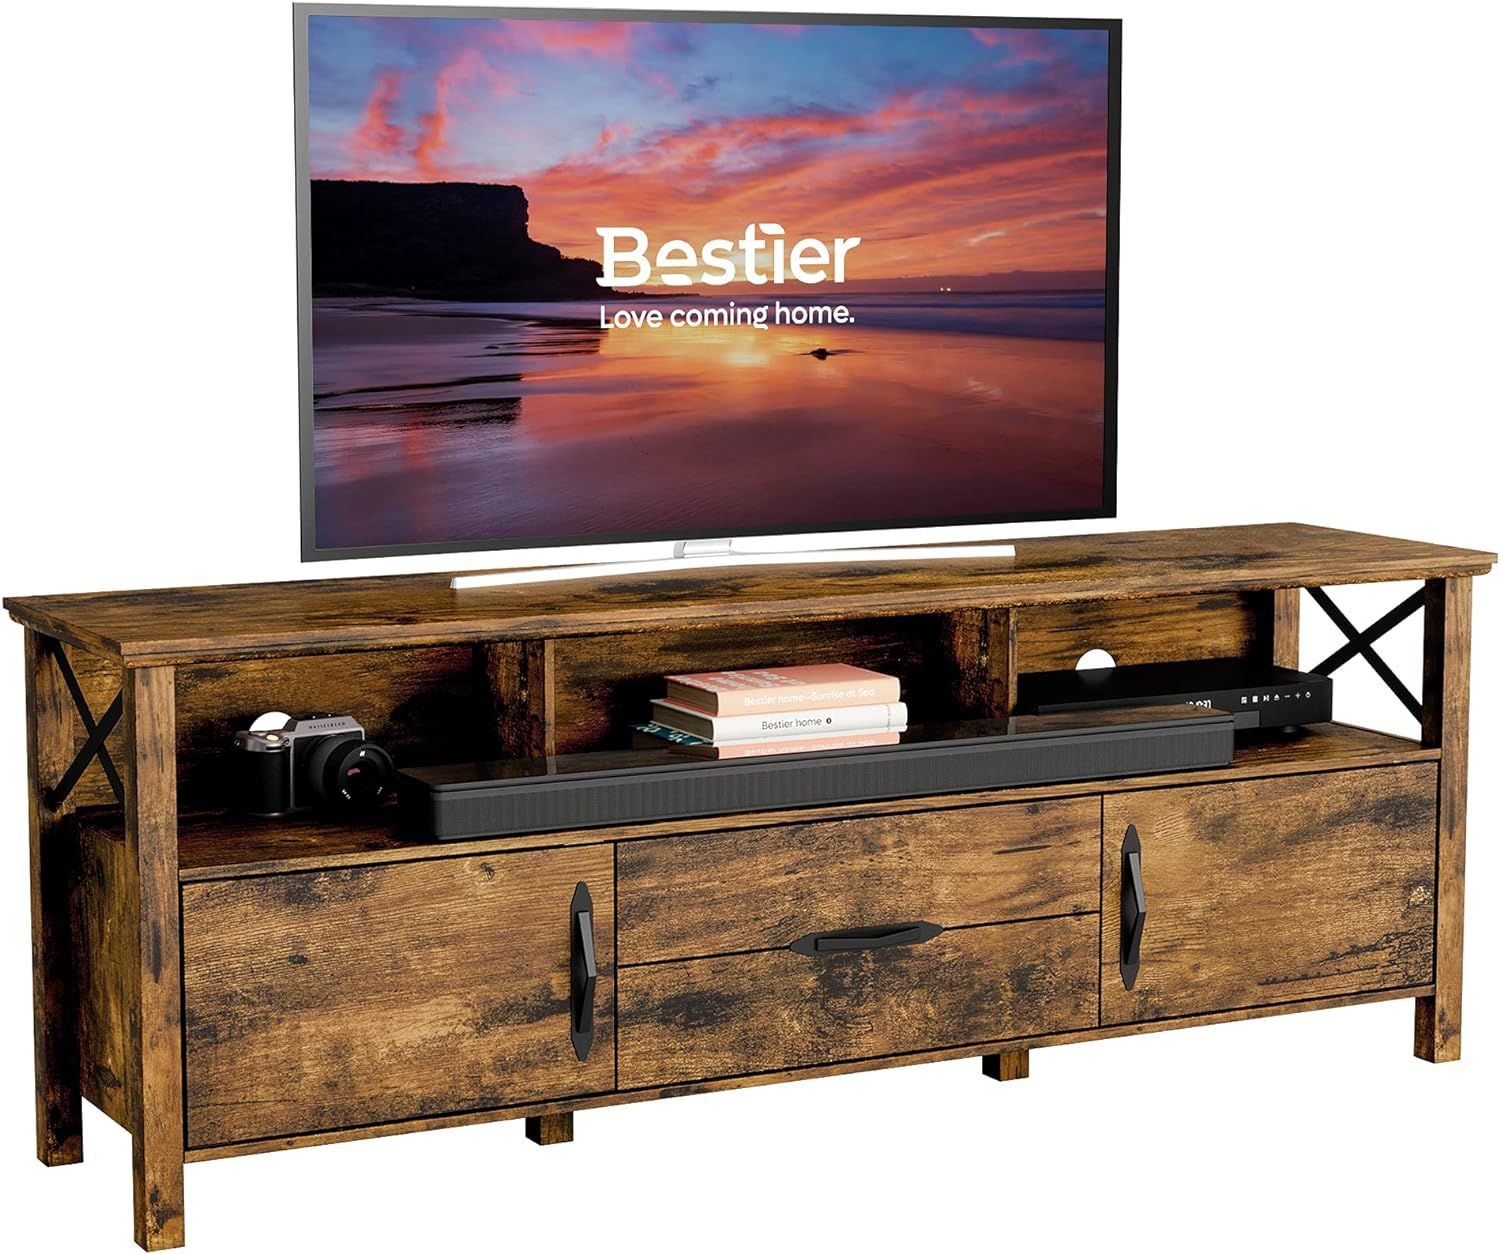 Bestier Tv Stand For Tv Up To 75 Inch, Farmhouse India | Ubuy In Bestier Tv Stand For Tvs Up To 75&quot; (View 14 of 15)